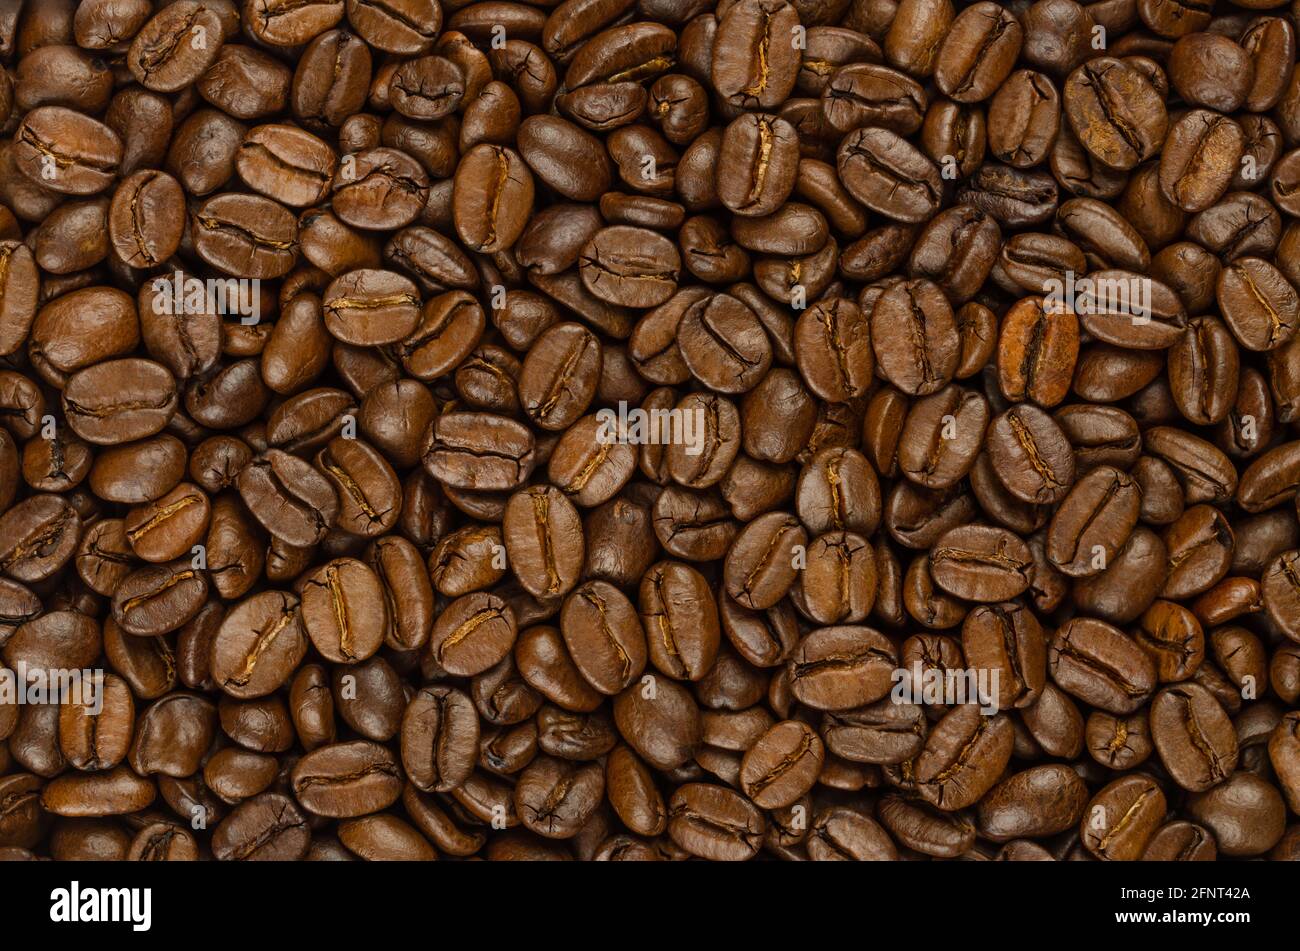 Roasted coffee beans, background, from above. Dark brown, roasted seeds of berries from Coffea arabica, also known as Arabian or arabica coffee. Stock Photo